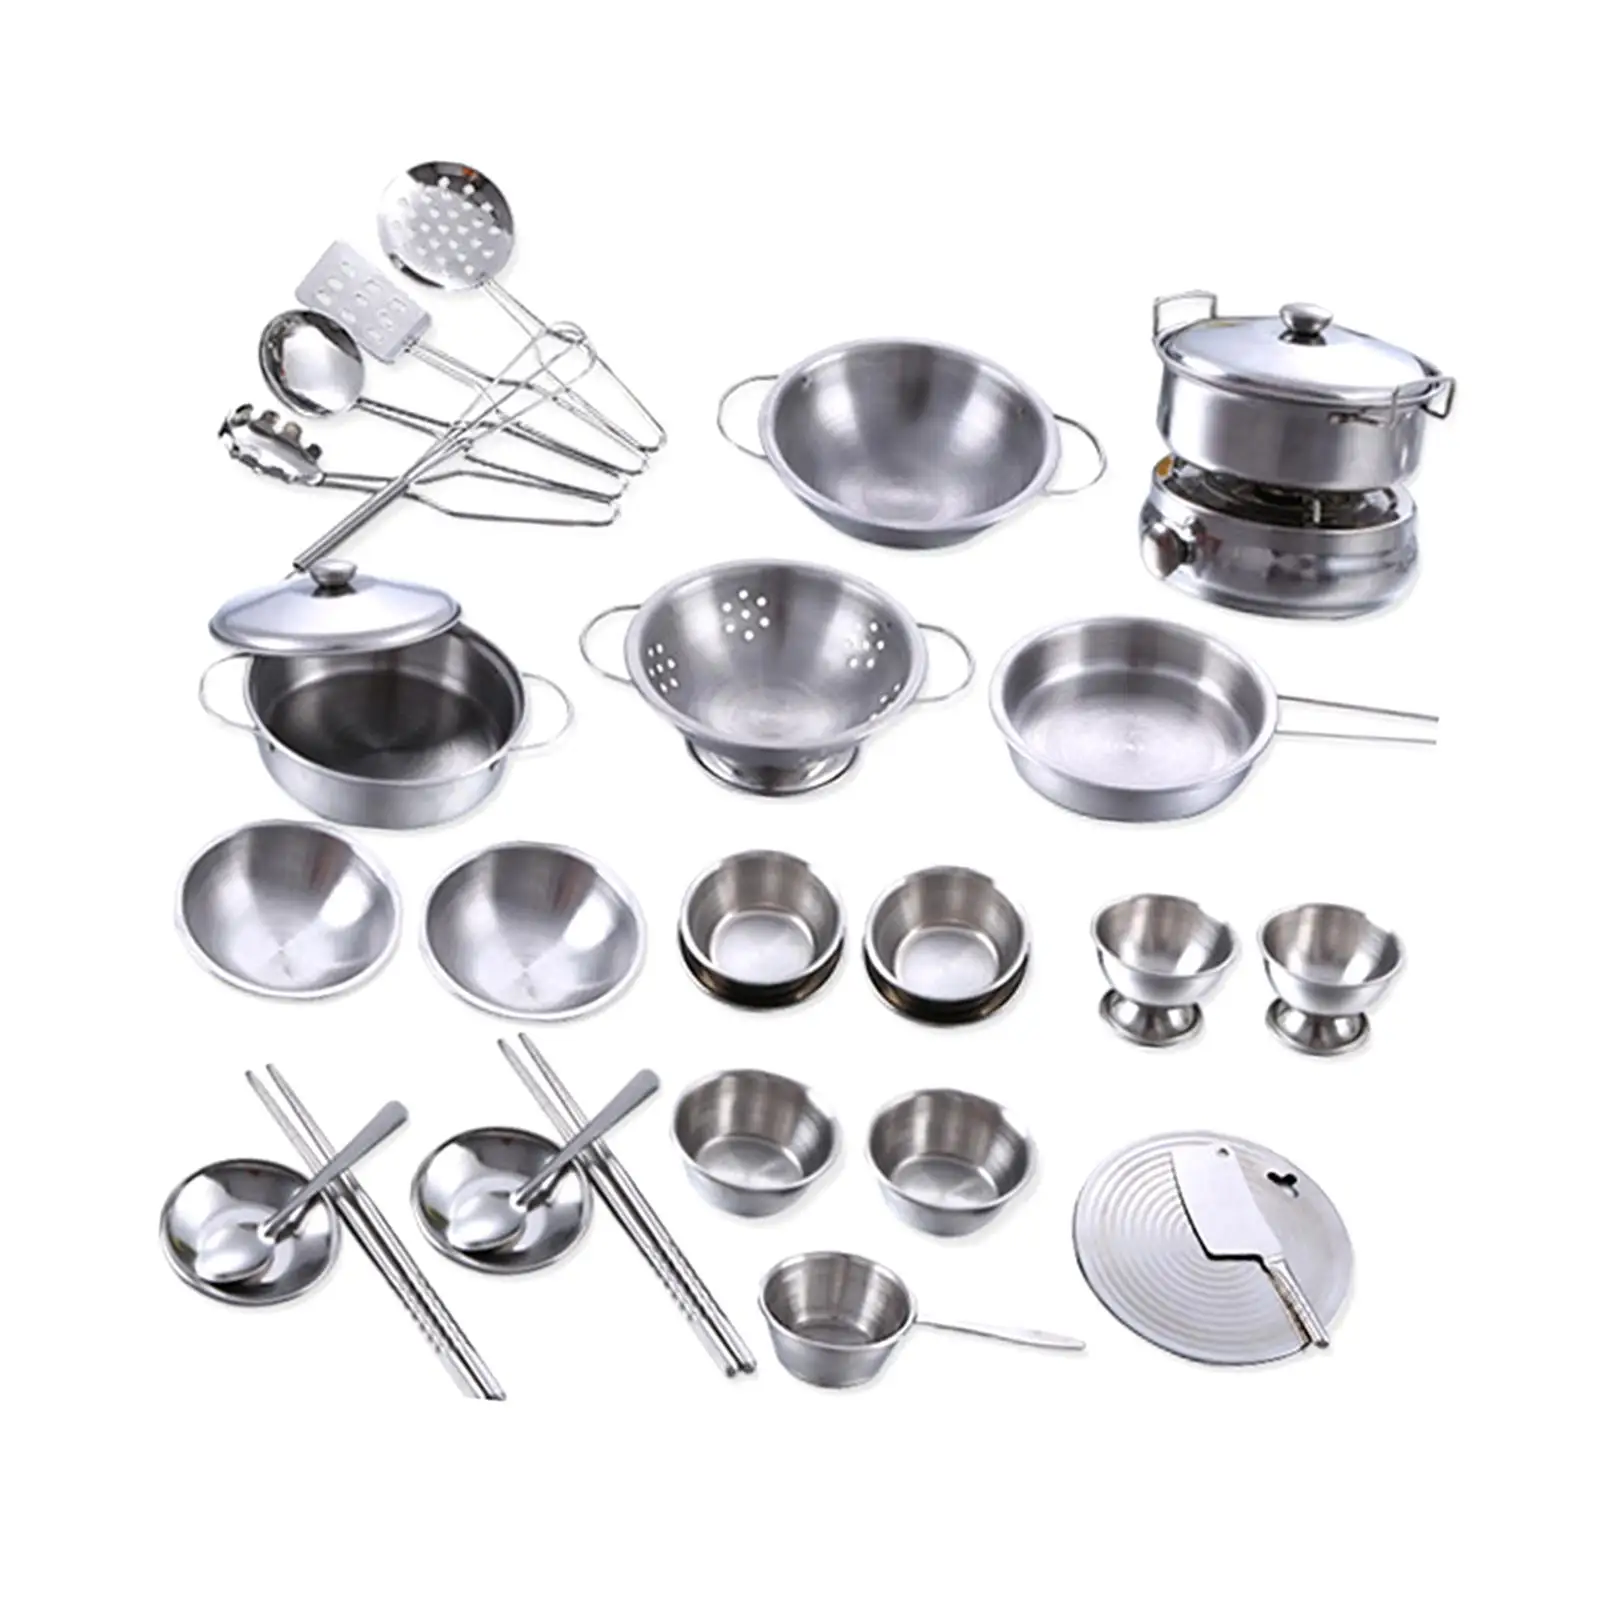 25Pcs Kitchen Pretend Toys Cooking Utensils Stainless Steel Durable Polished